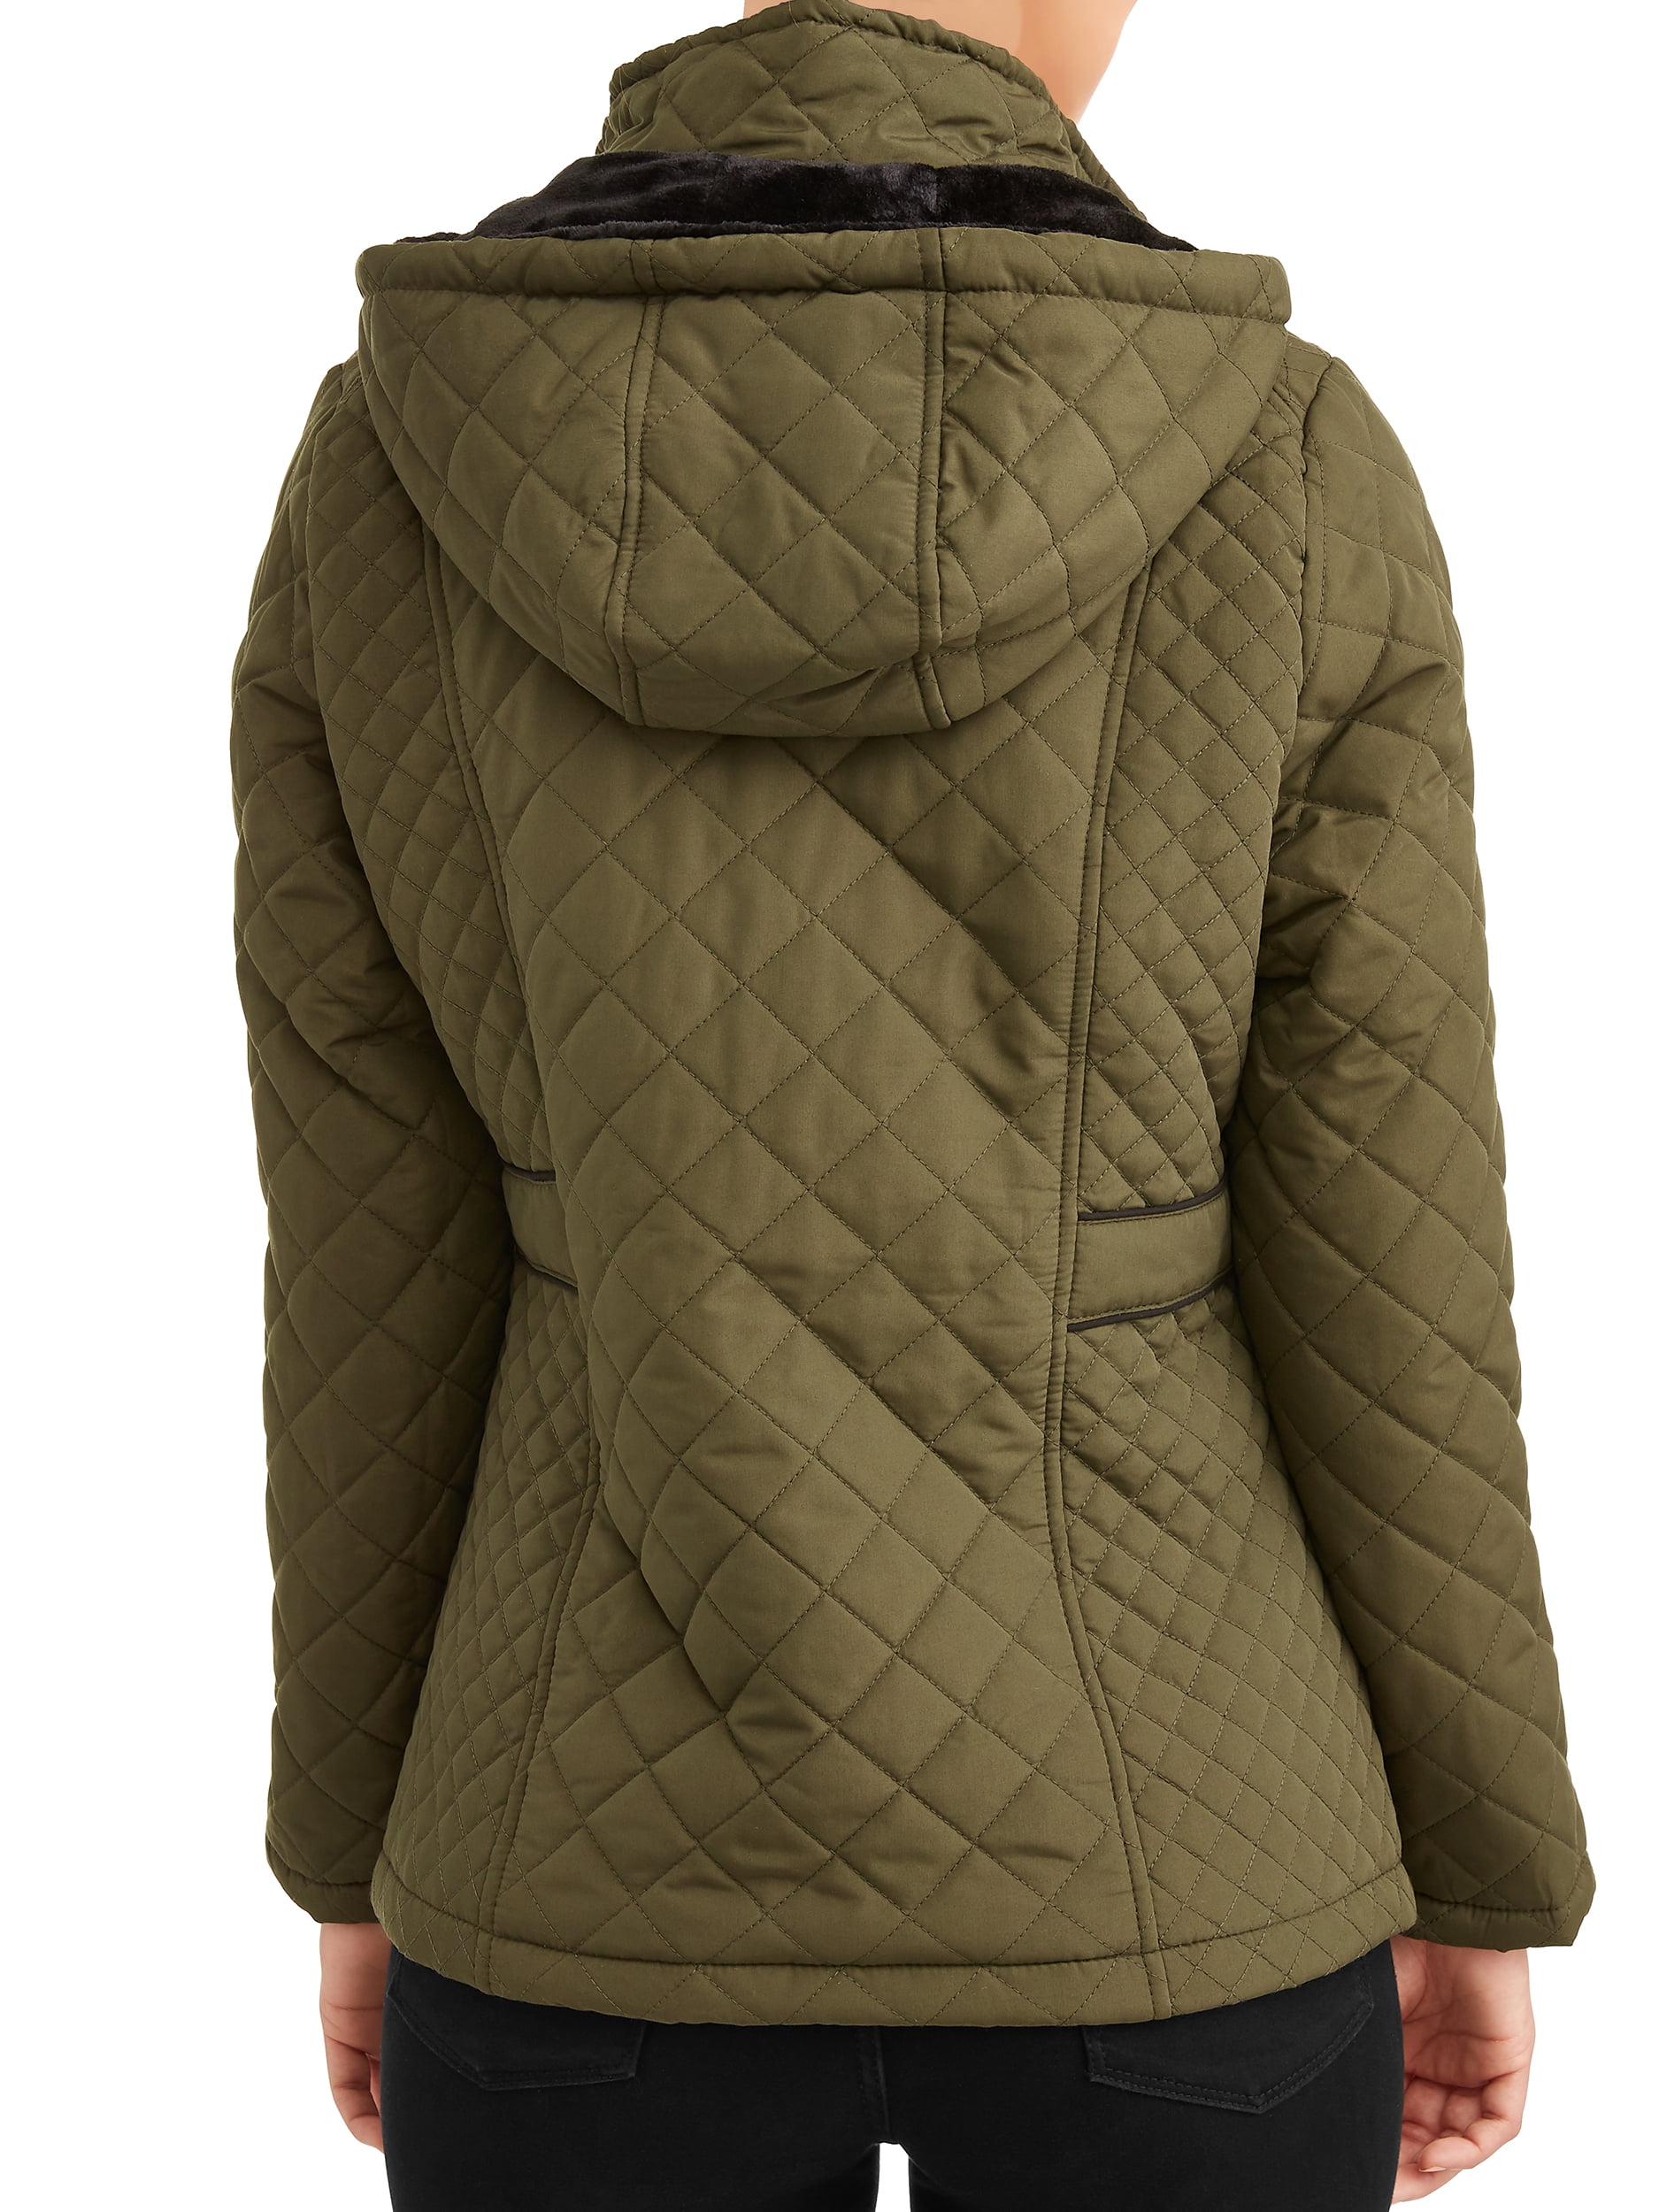  Big Chill Women's Diamond Quilted Anorak Jacket, Forest, S :  Sports & Outdoors